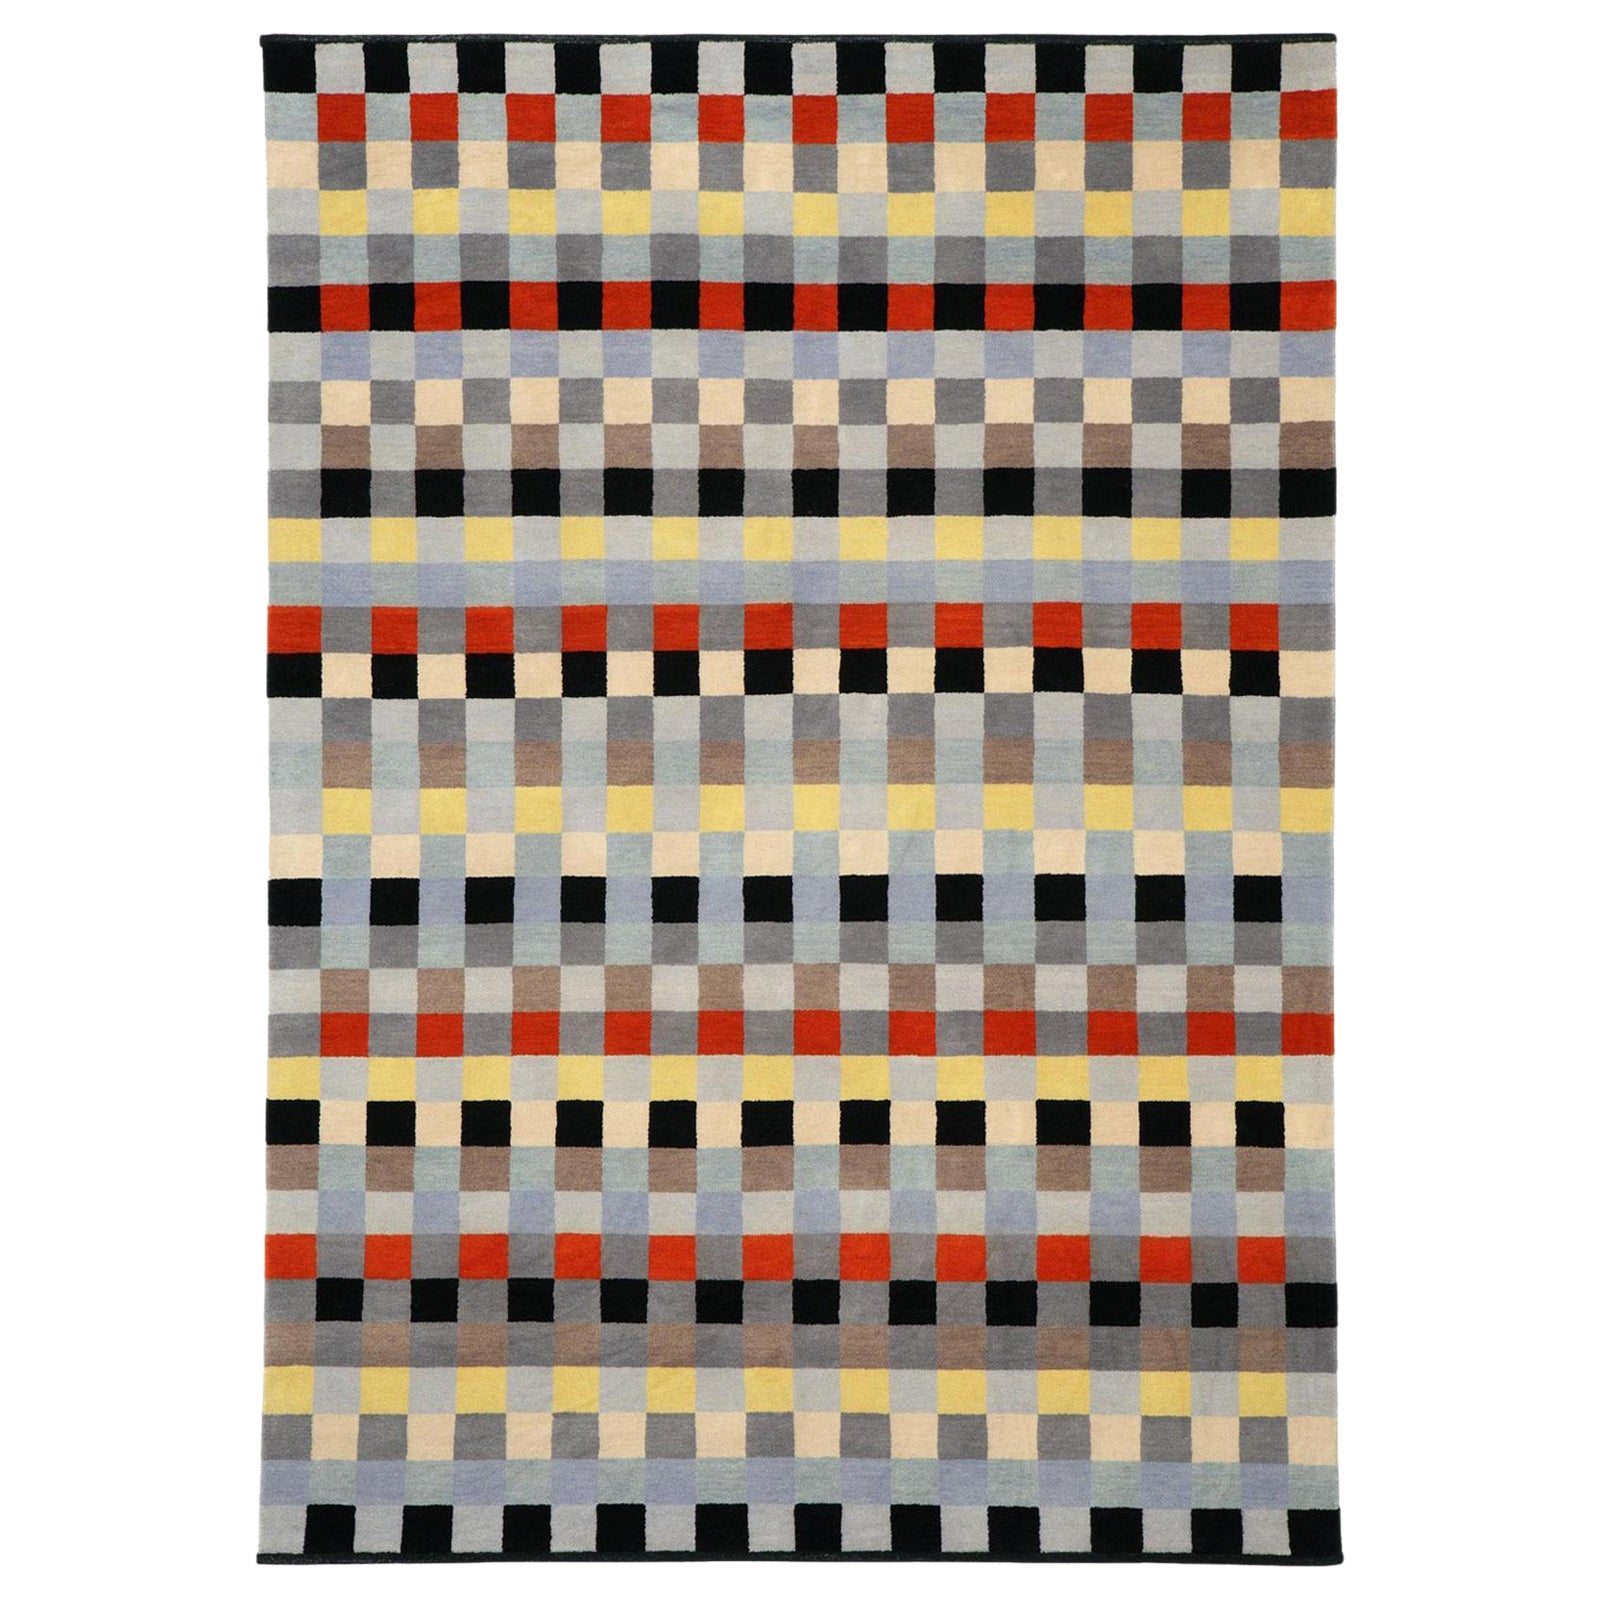 Small Child's Room Rug by Anni Albers